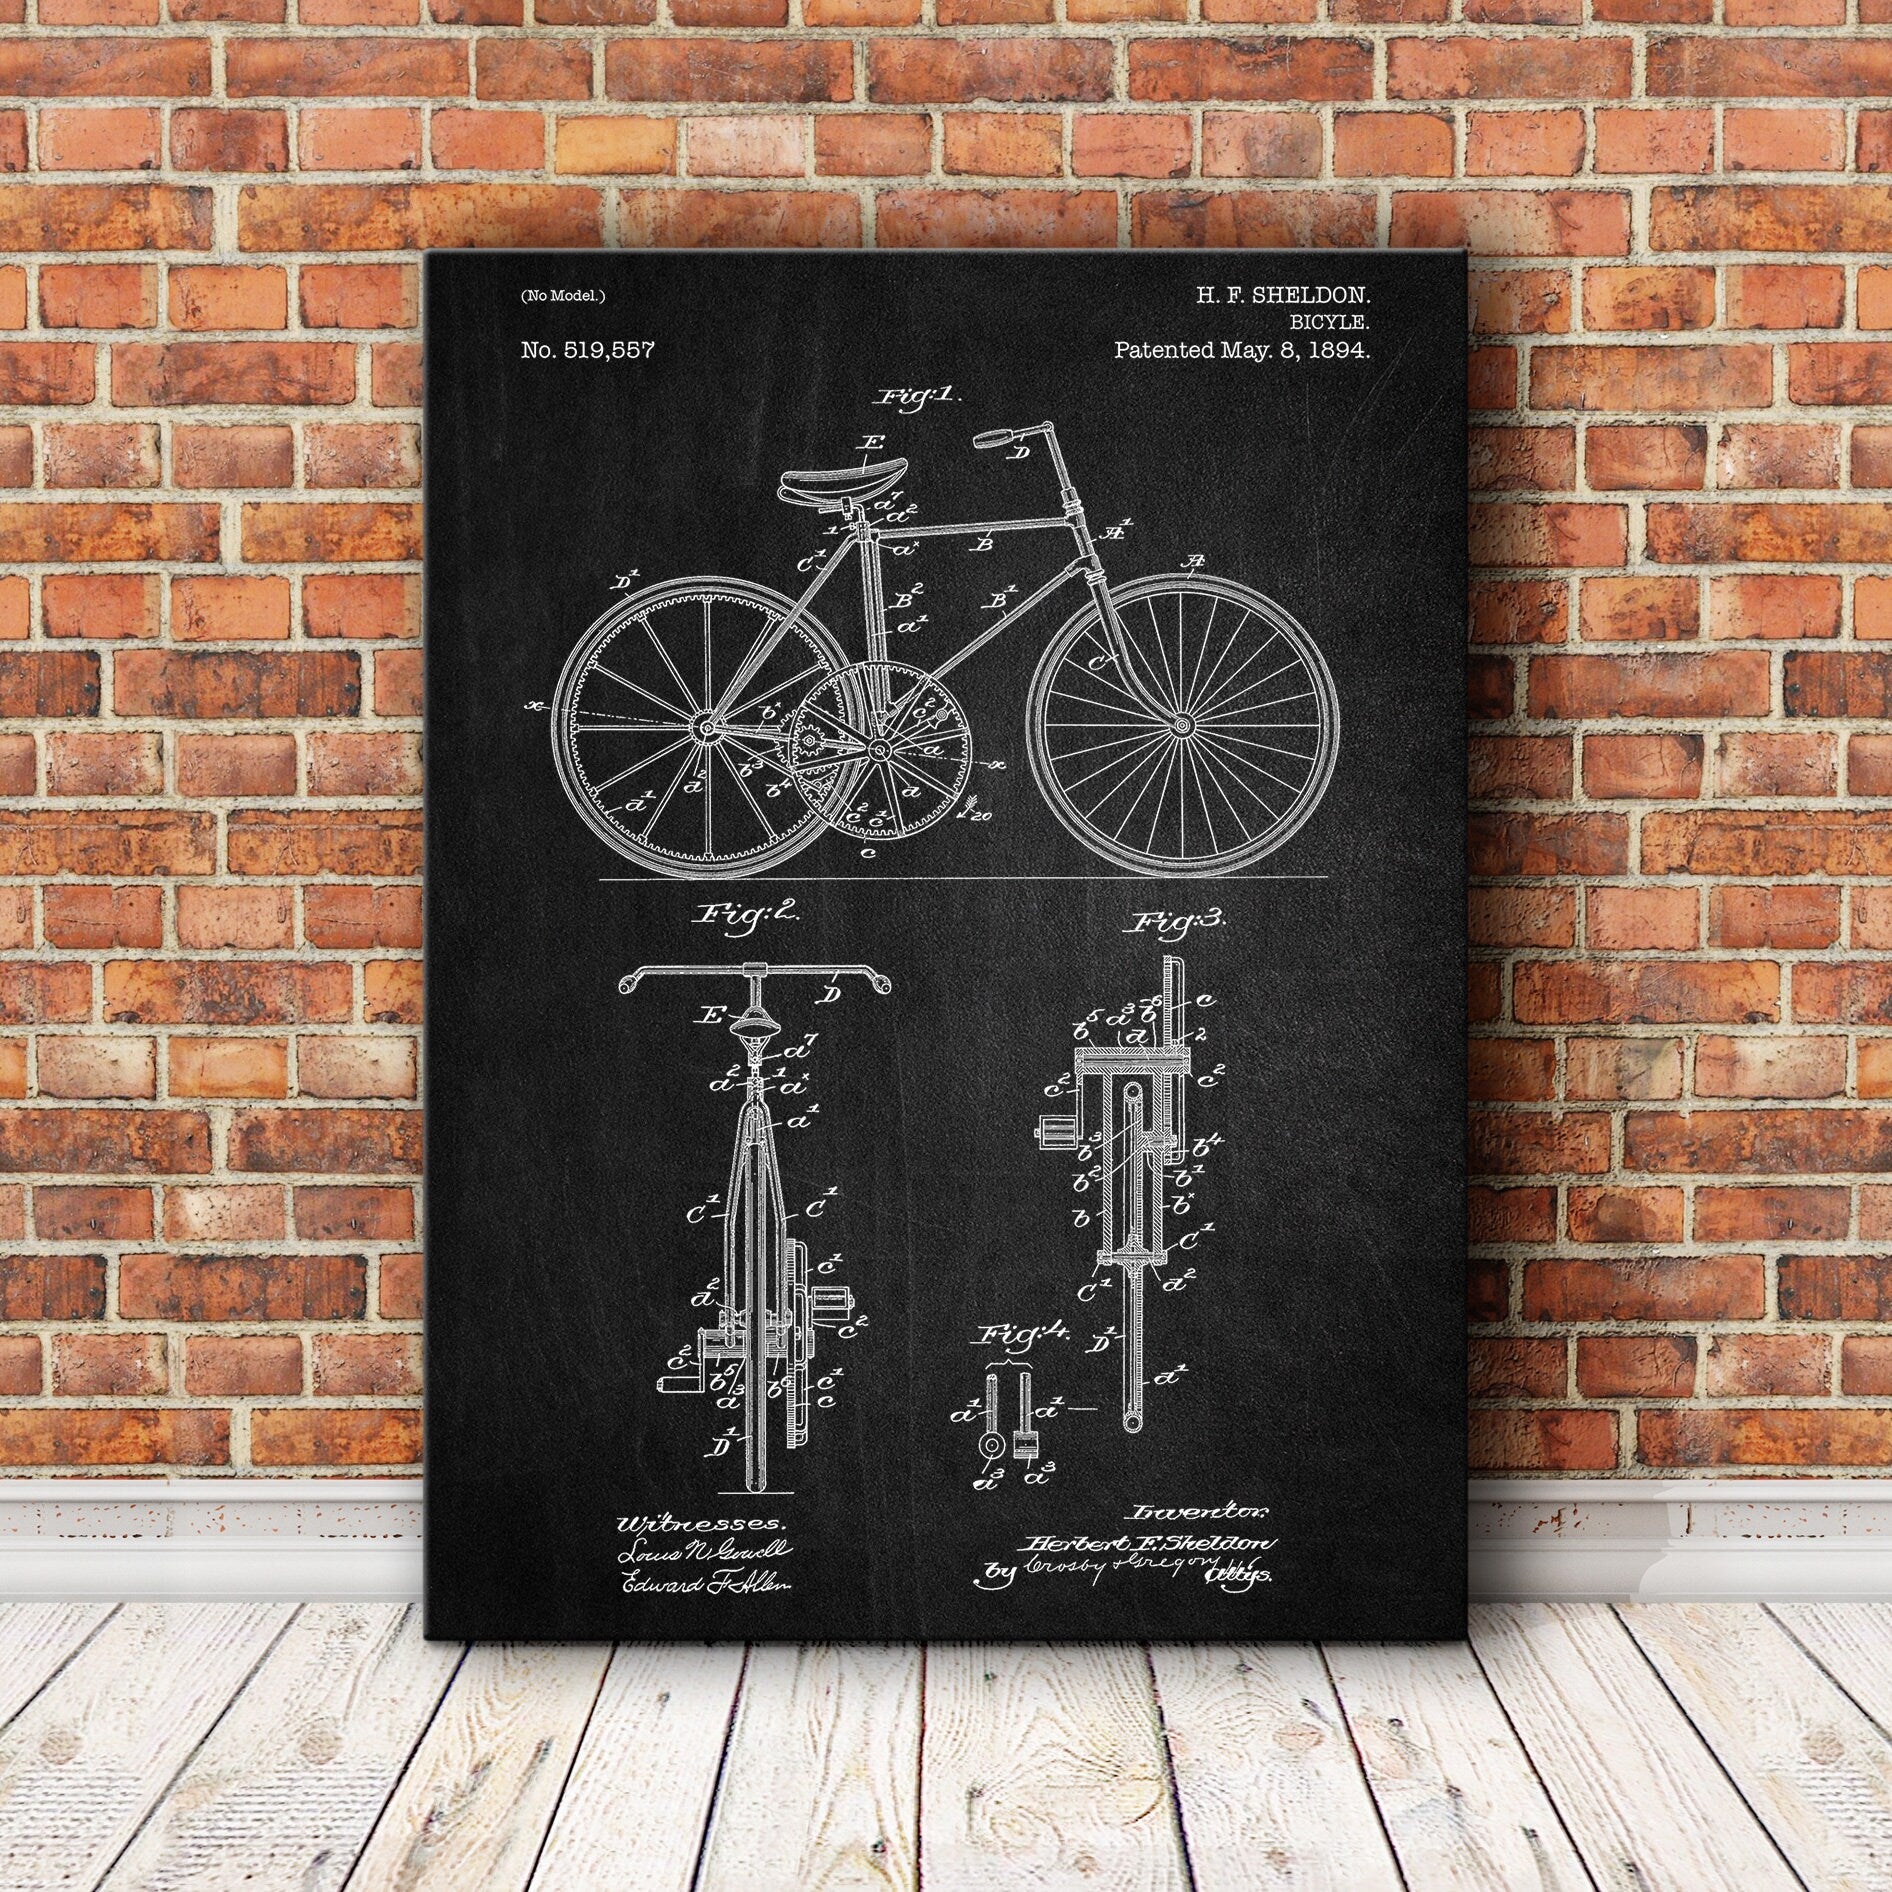 Sports Patent print, Bicycle for Sports Patent print, Patent print, Patent print design, Vintage patent print, Sports Art